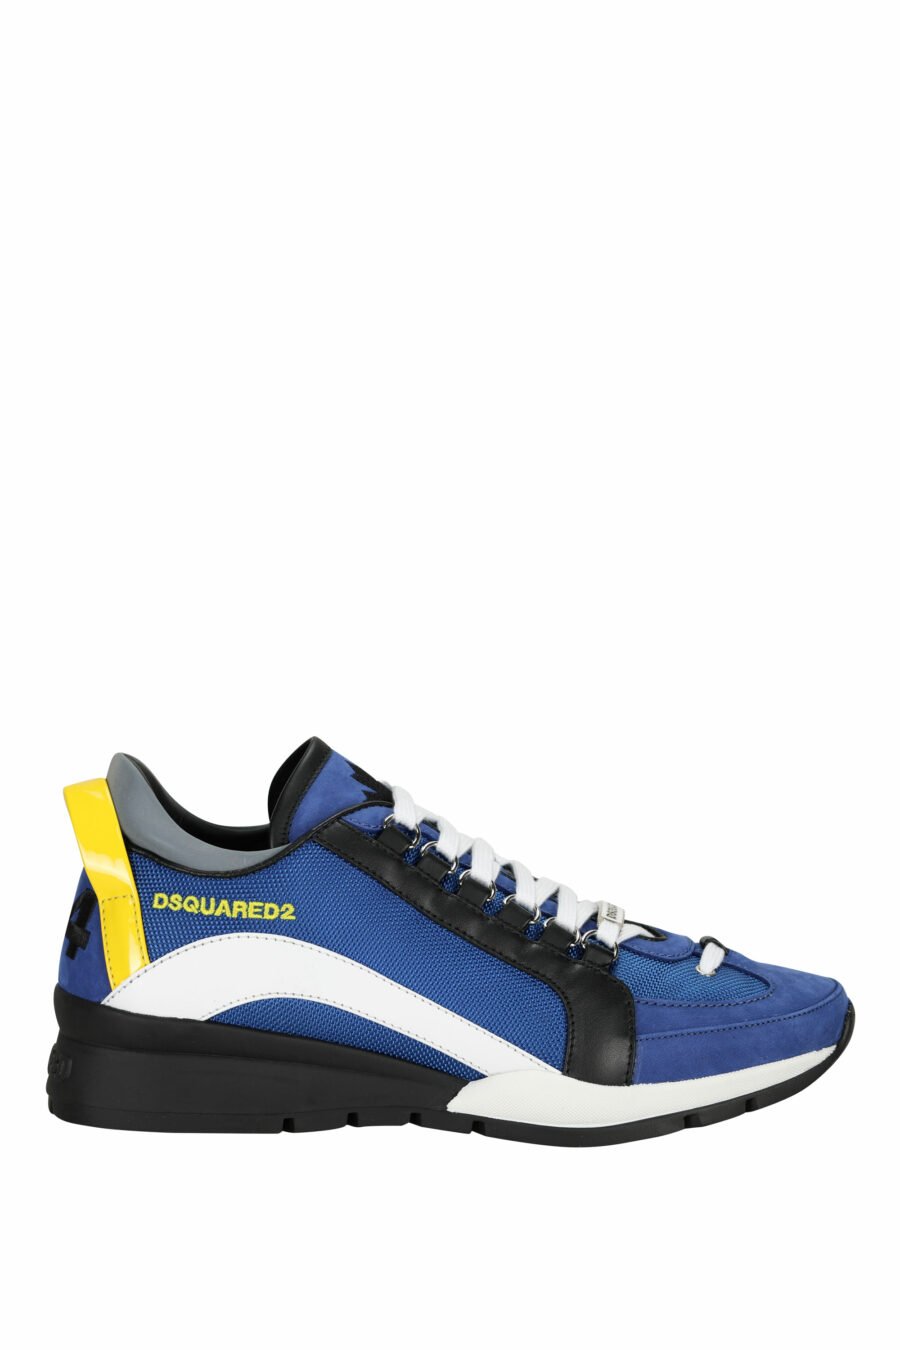 Blue trainers "legendary" with yellow detail - 8055777300343